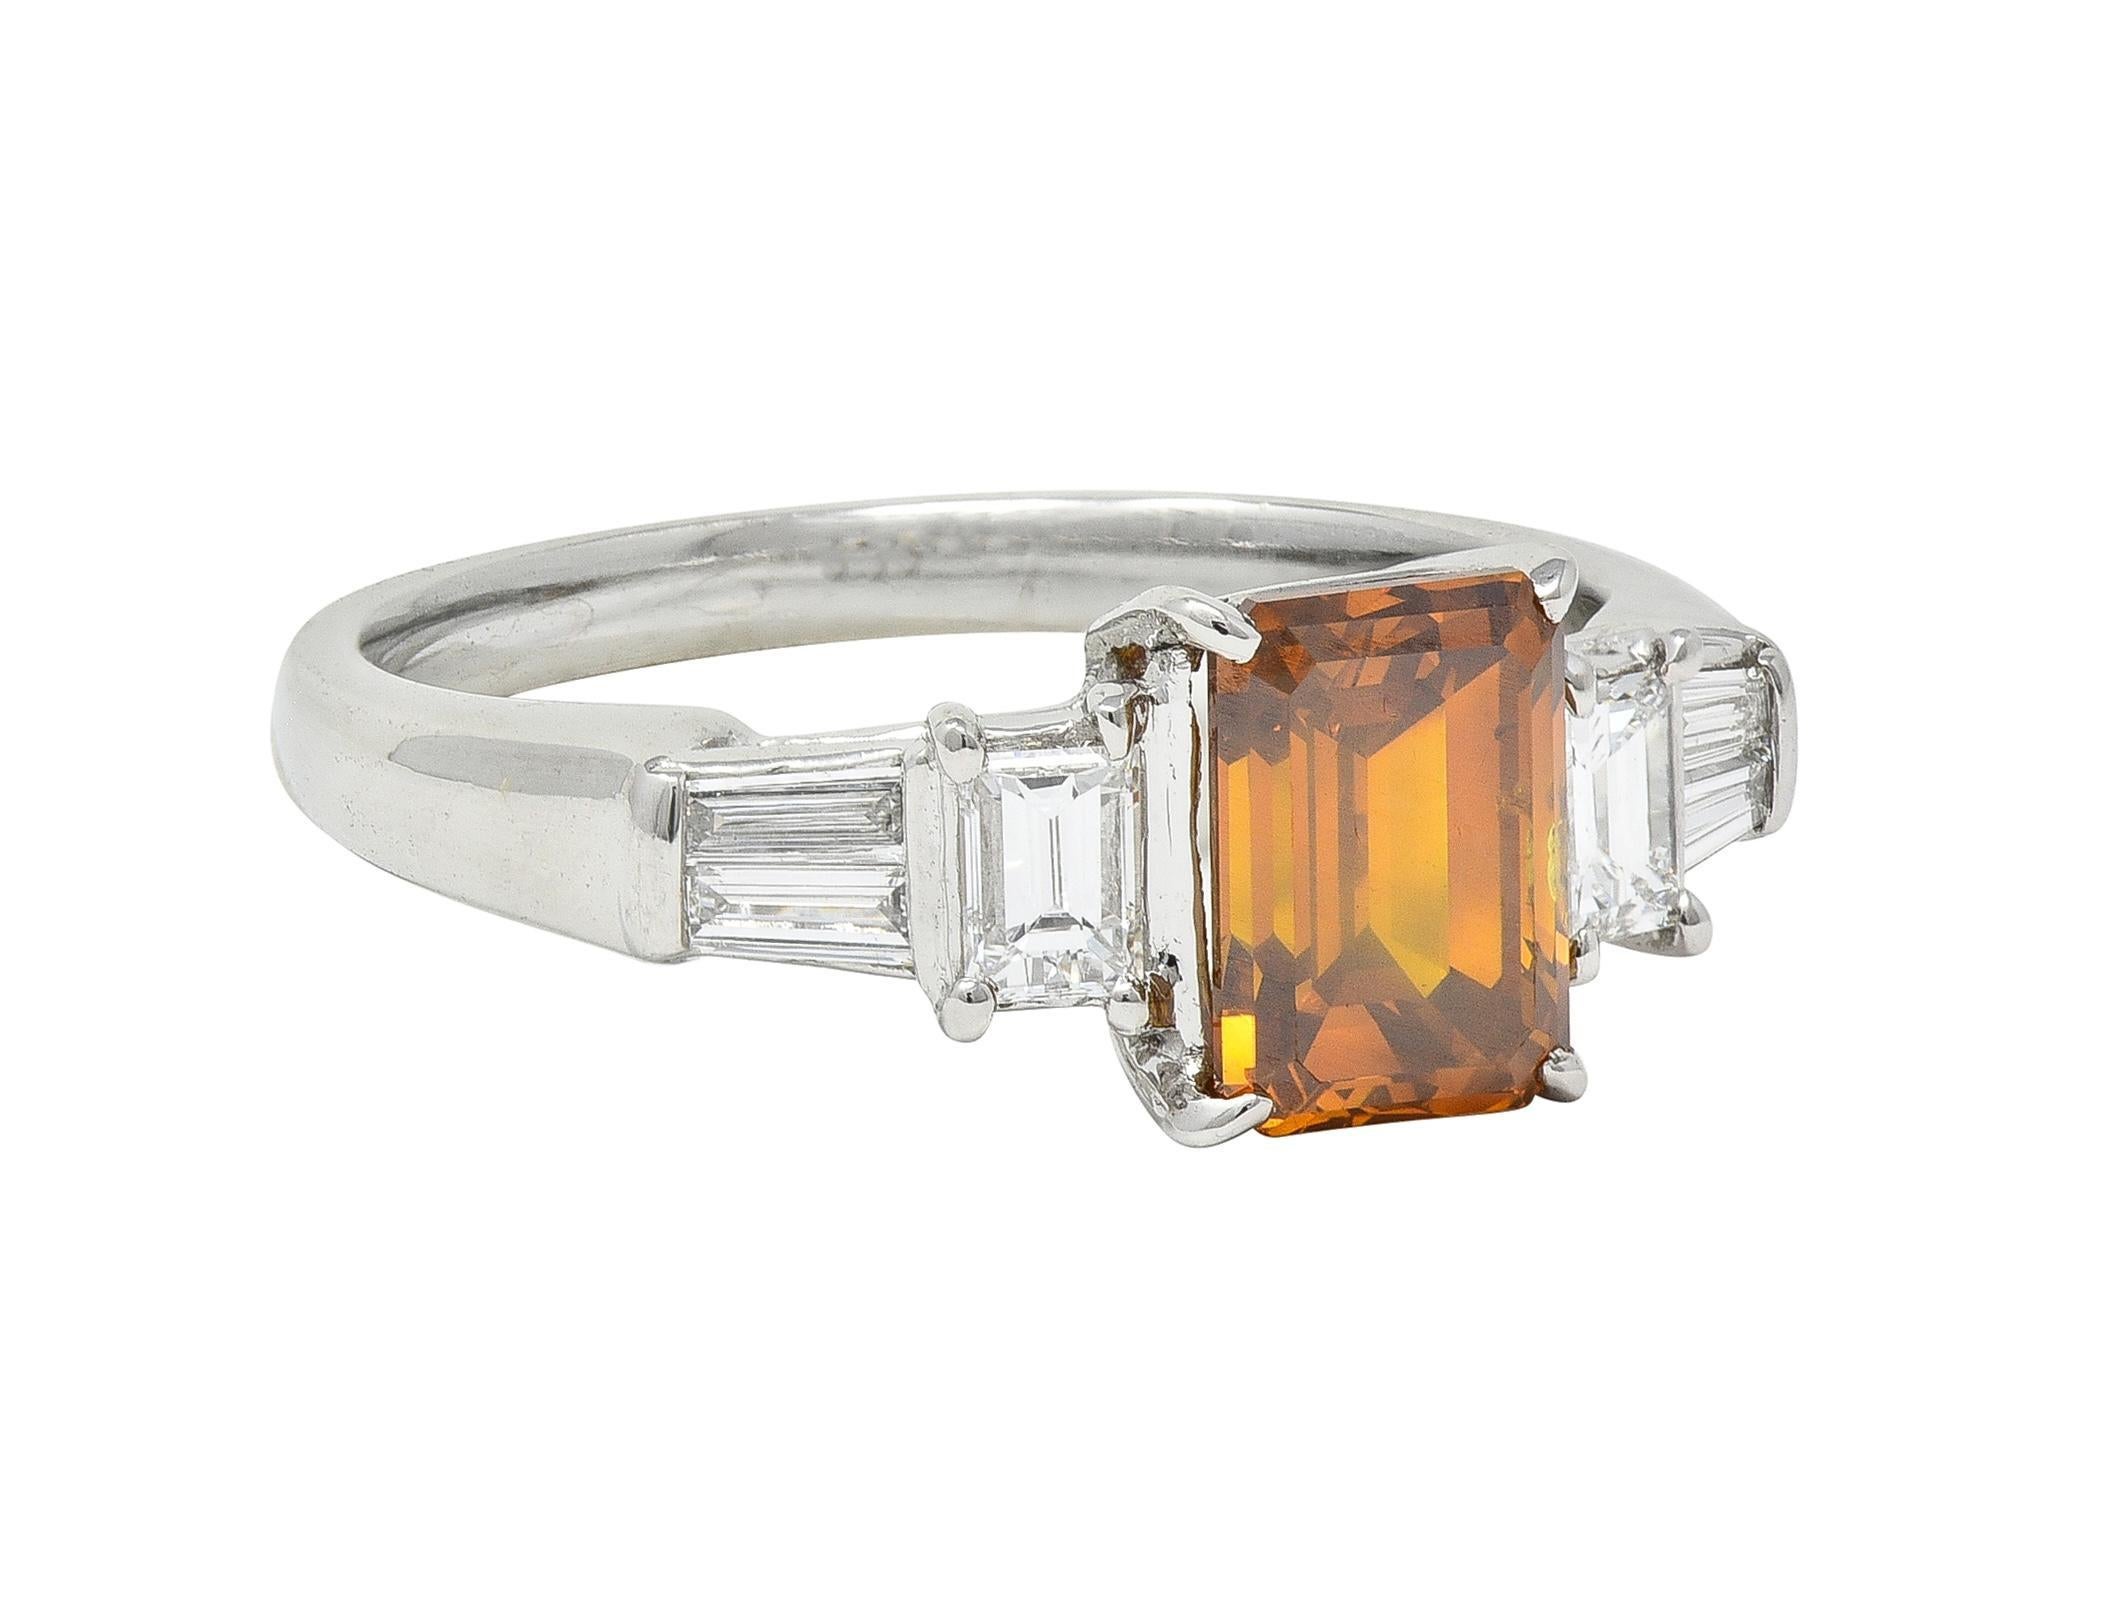 Centering an emerald cut diamond weighing 1.52 carats total 
Transparent medium orangey brown in color
Prong set in basked and flanked by stepped shoulders 
Bar and prong set with baguette and tapered baguette cut diamonds 
Flanked by flared